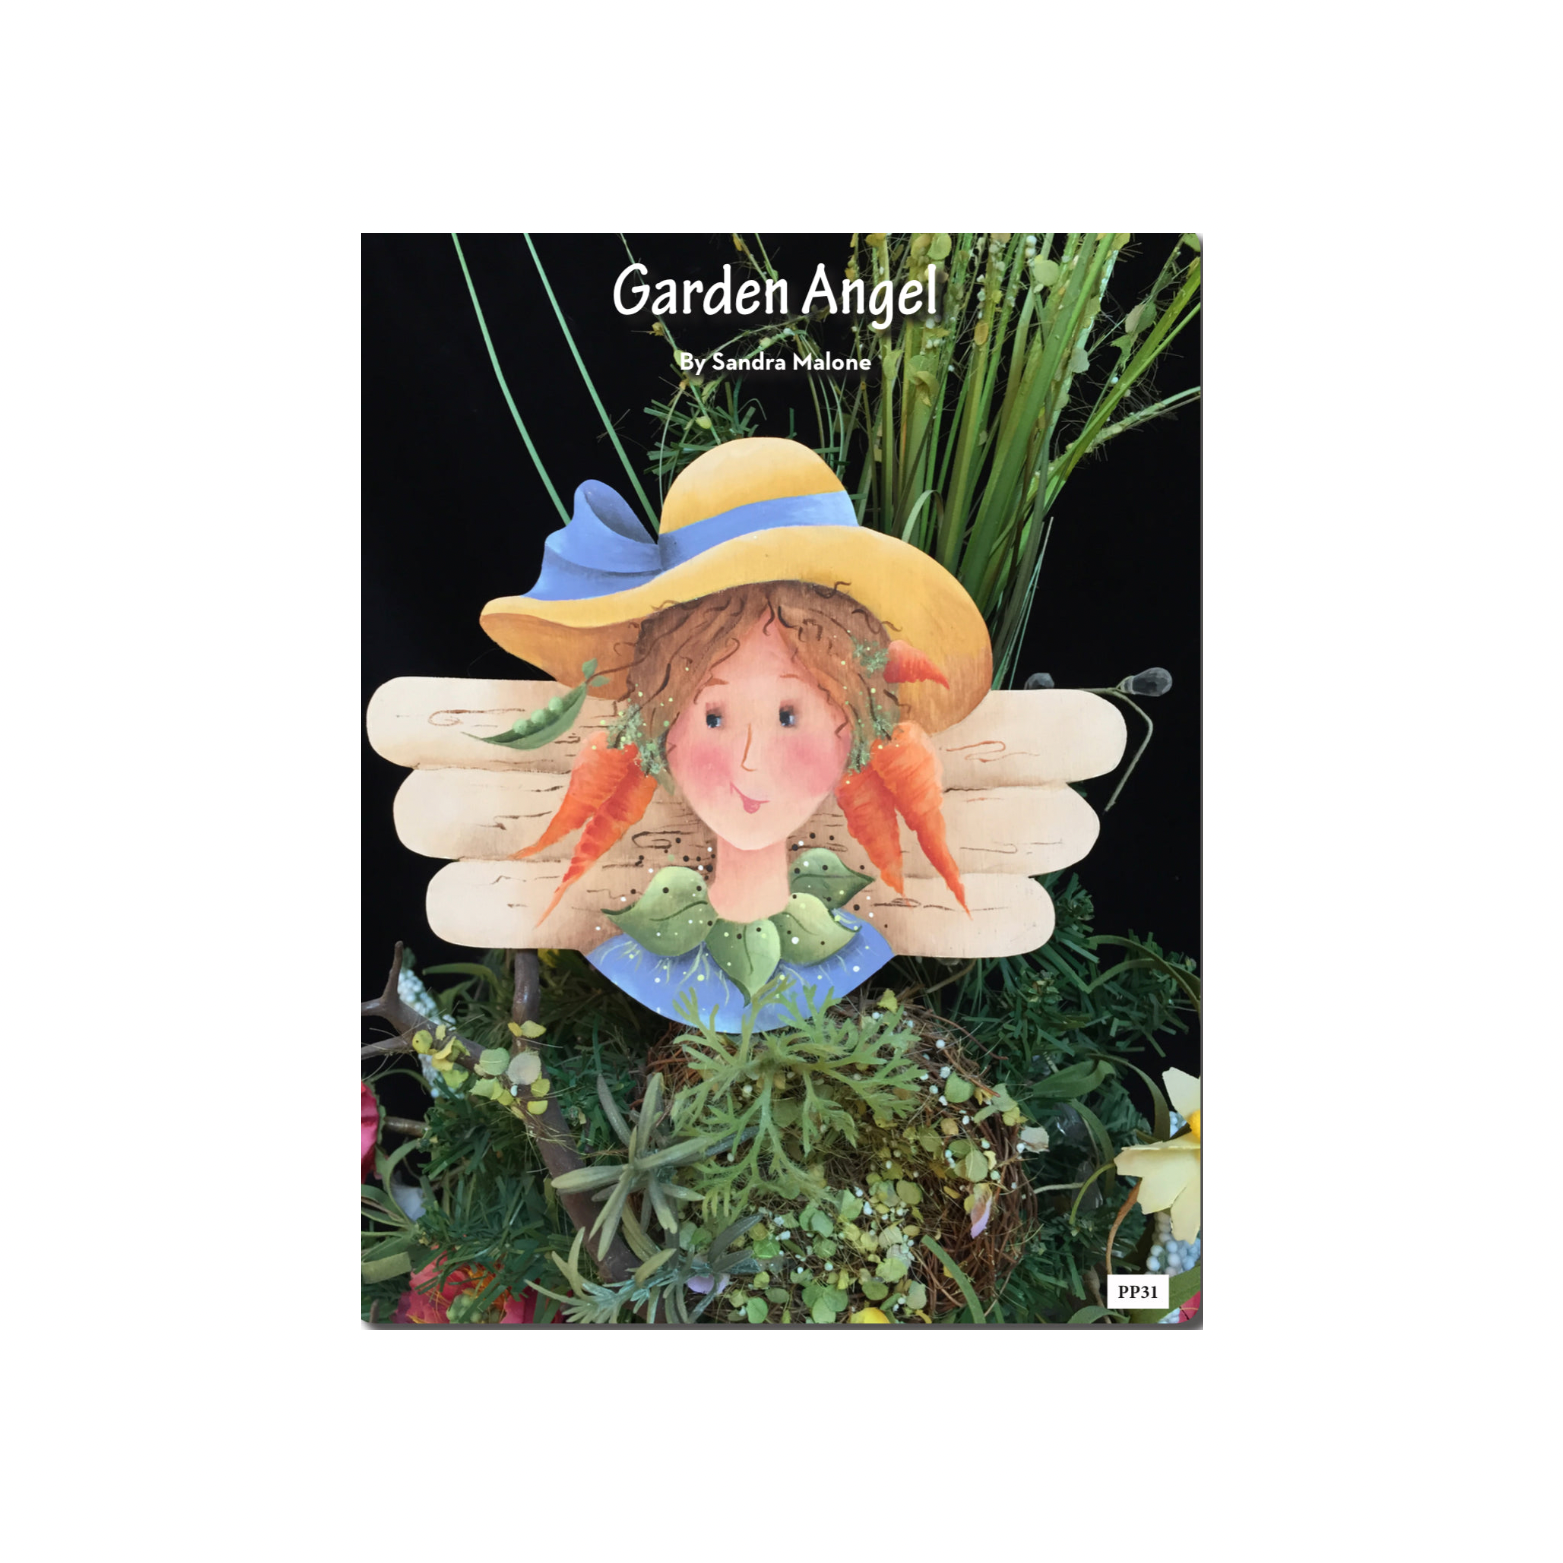 Garden Angel by Sandra Malone Out of the Wood